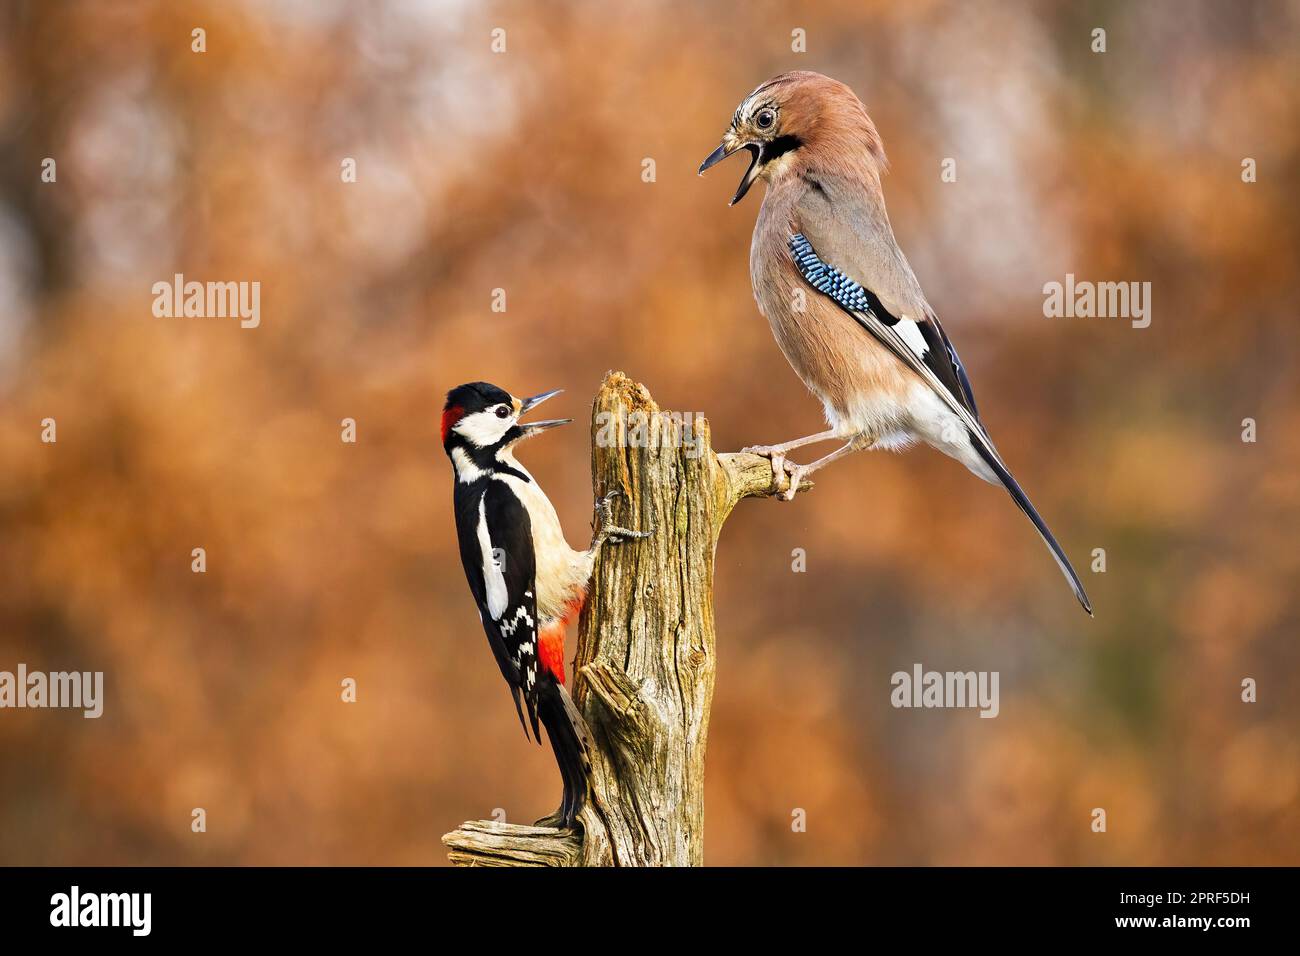 great spotted woodpecker and eurasian jay fighting on stump in autumn Stock Photo